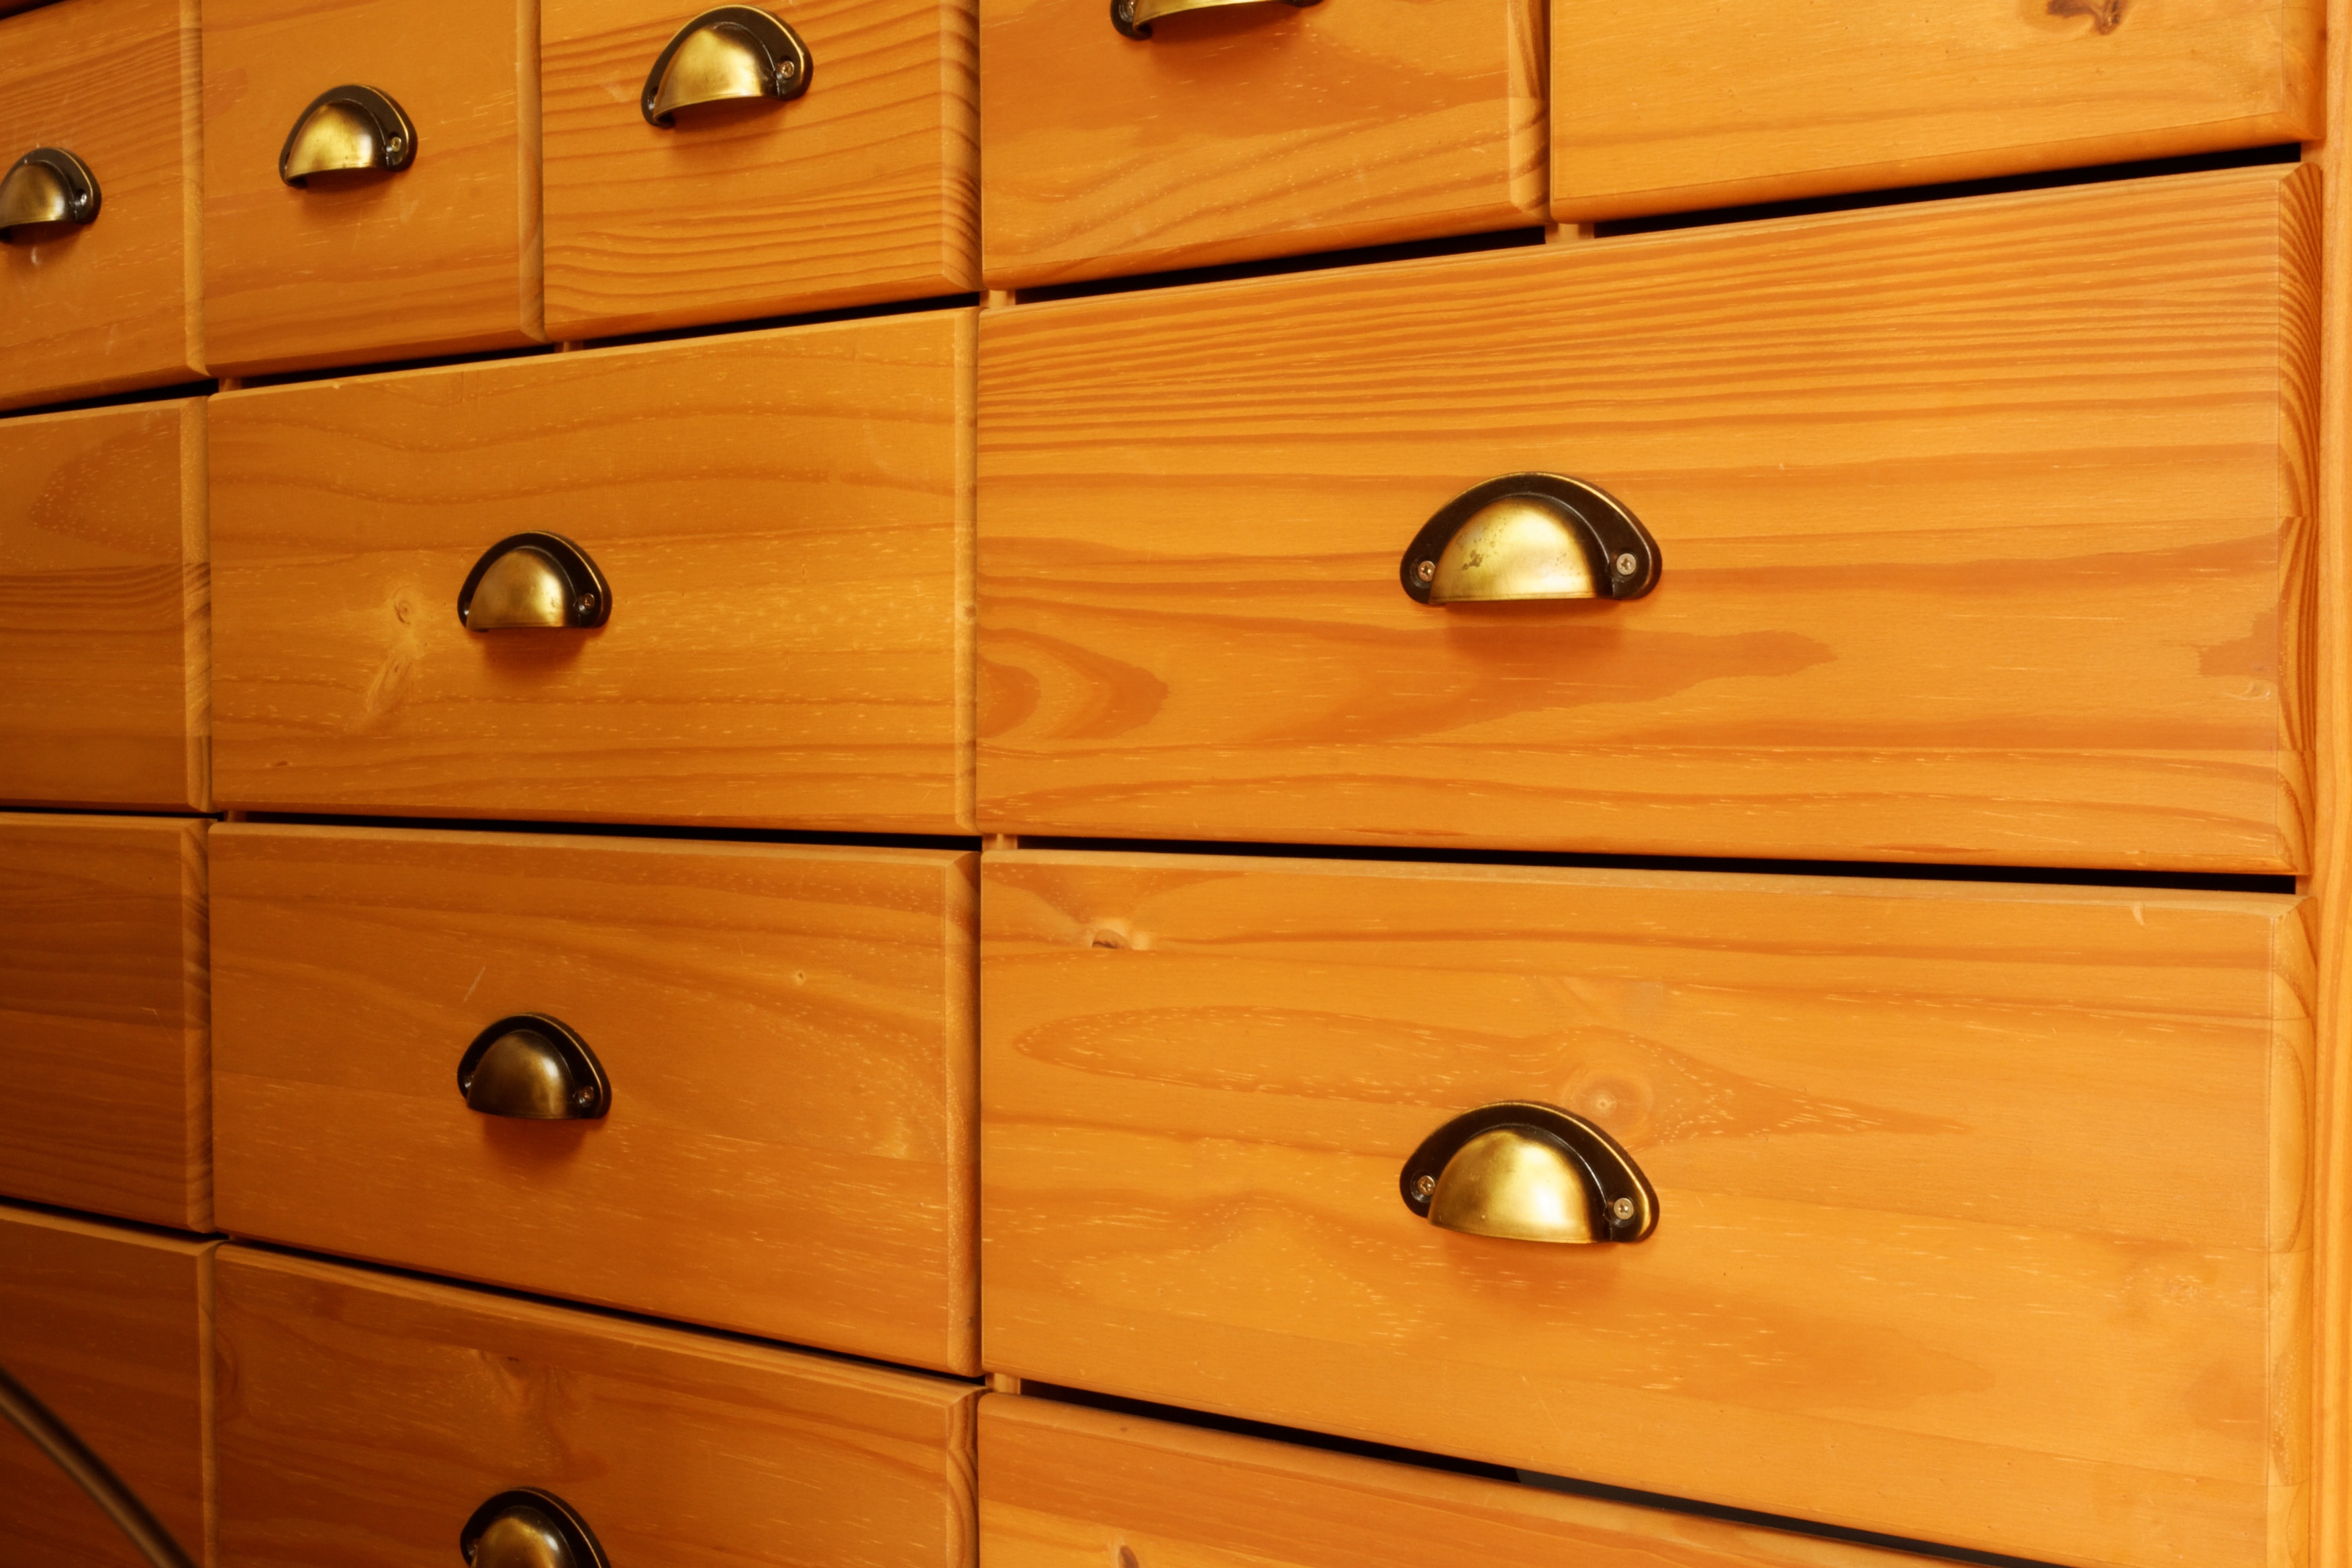 Where Should Drawer Handles Be Placed?